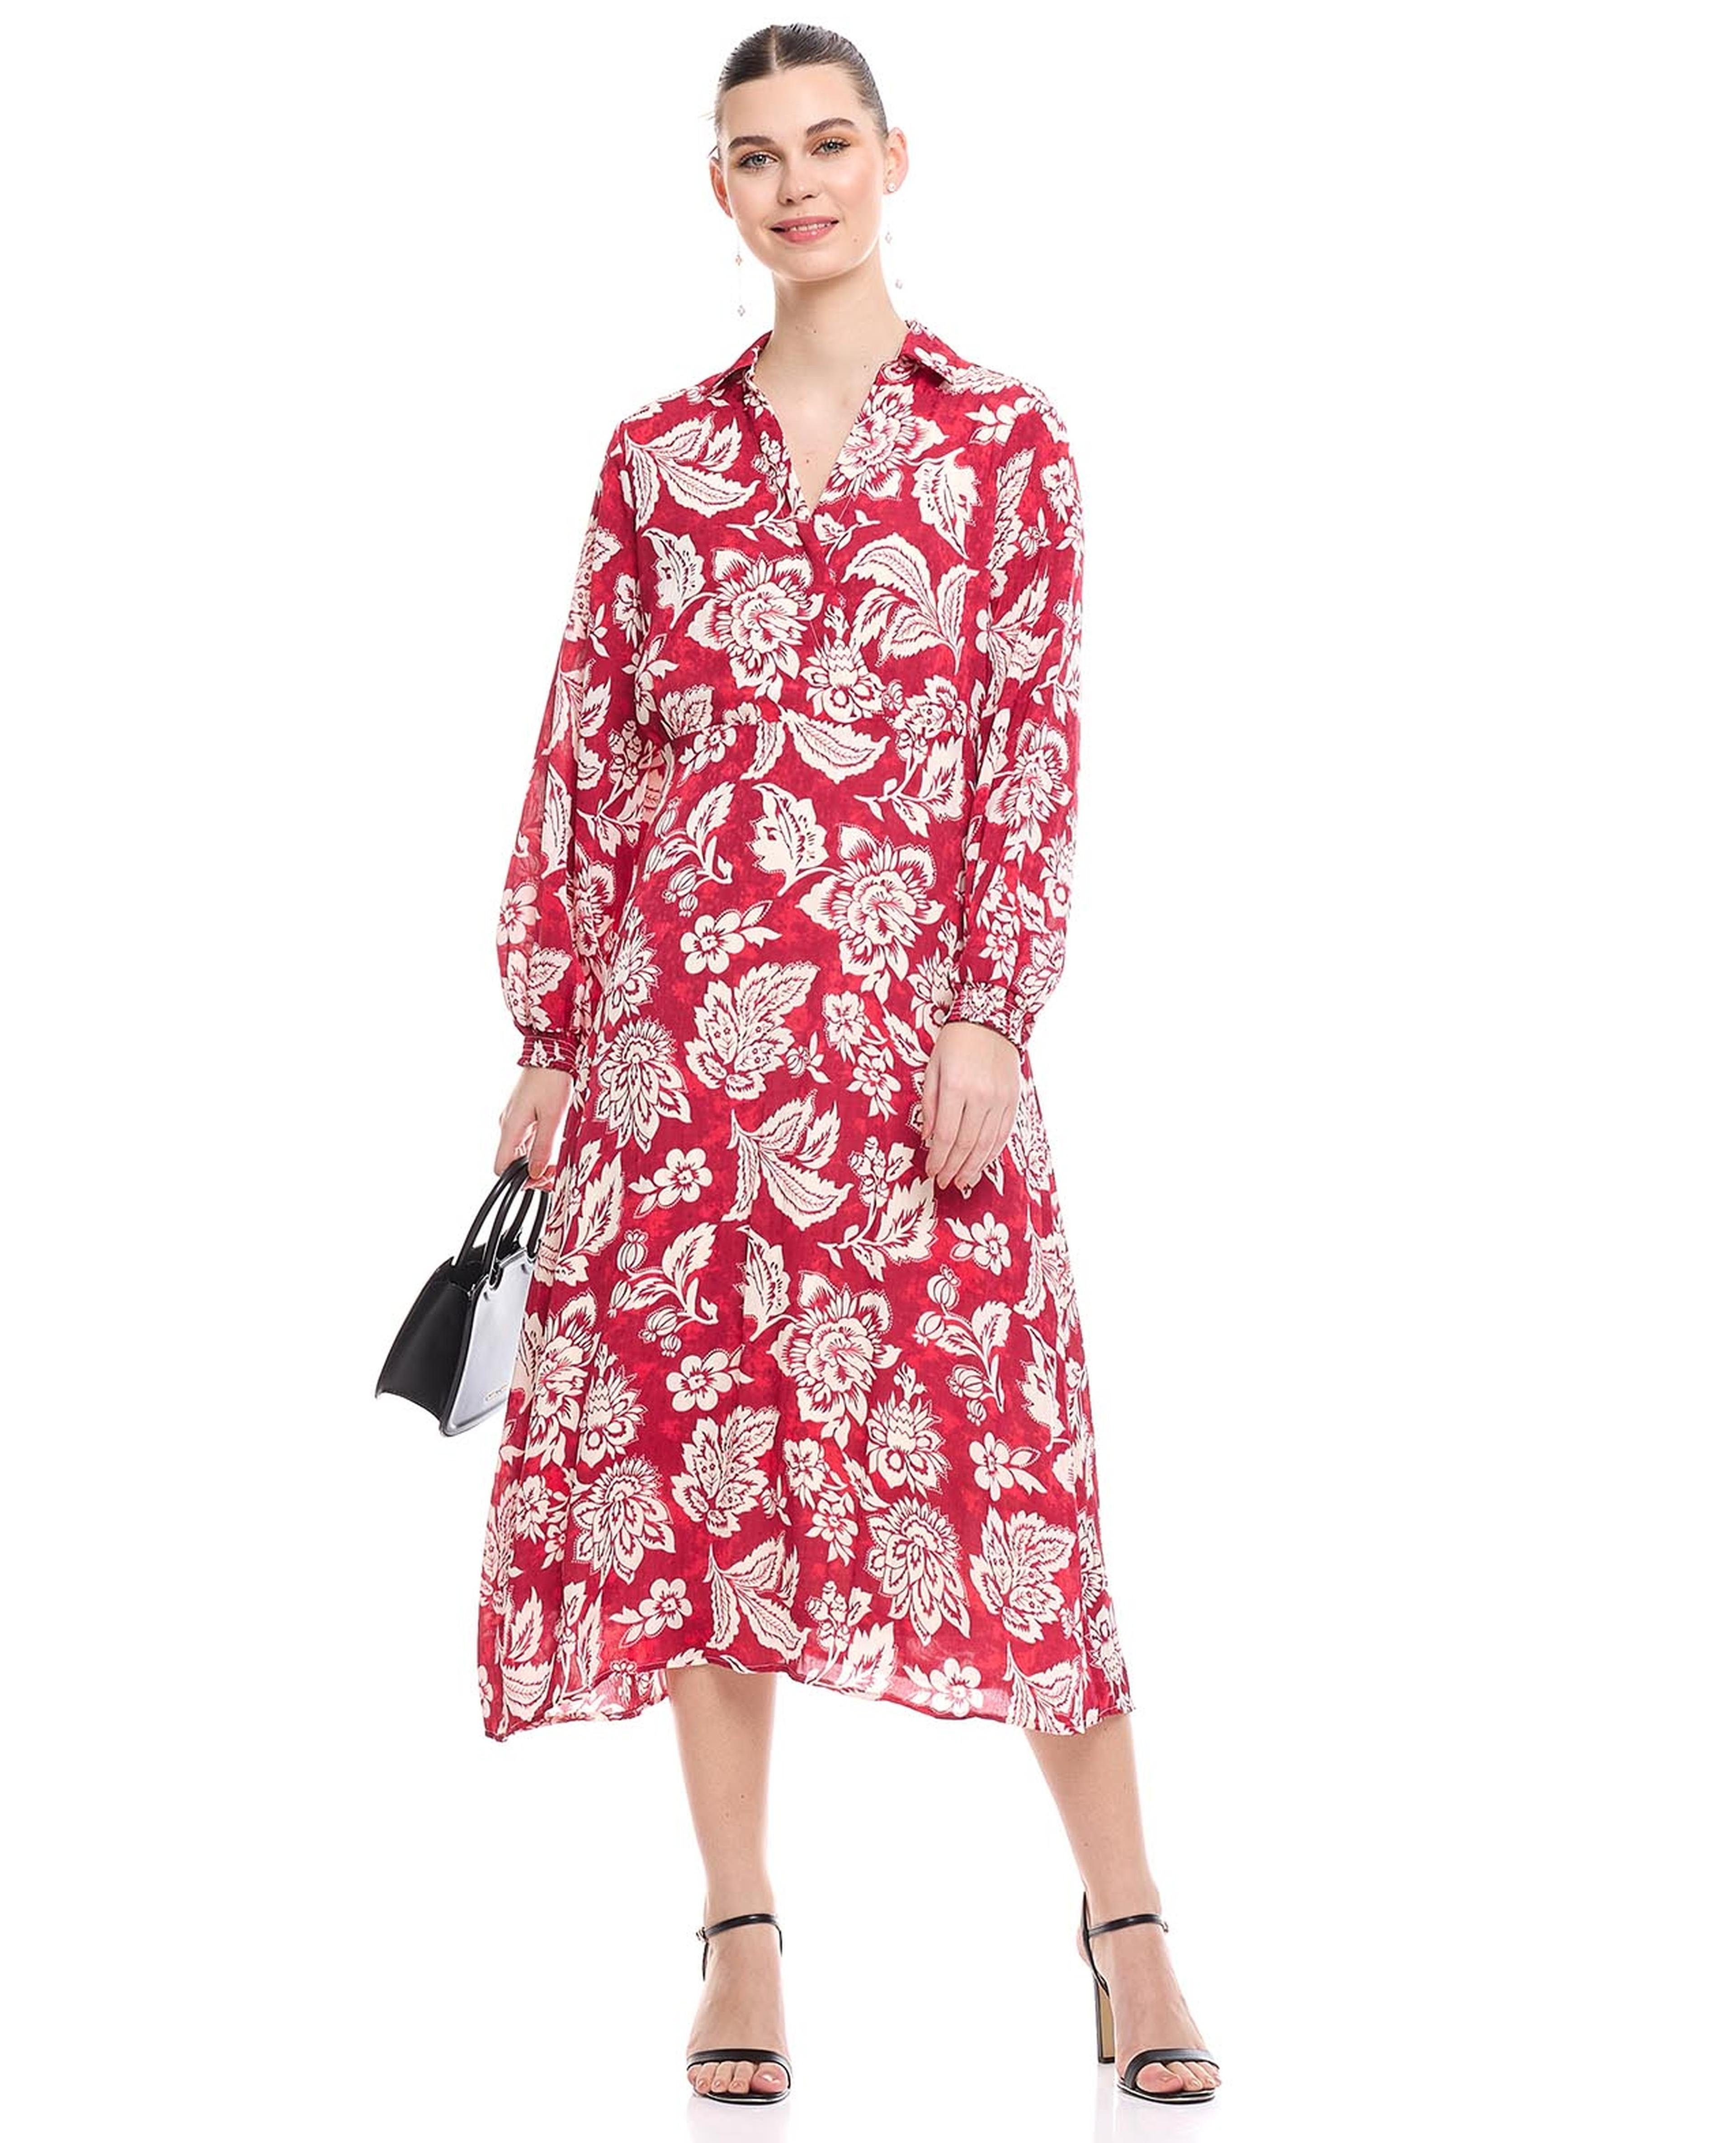 Floral Print A-Line Dress with V-Neck and Bishop Sleeves